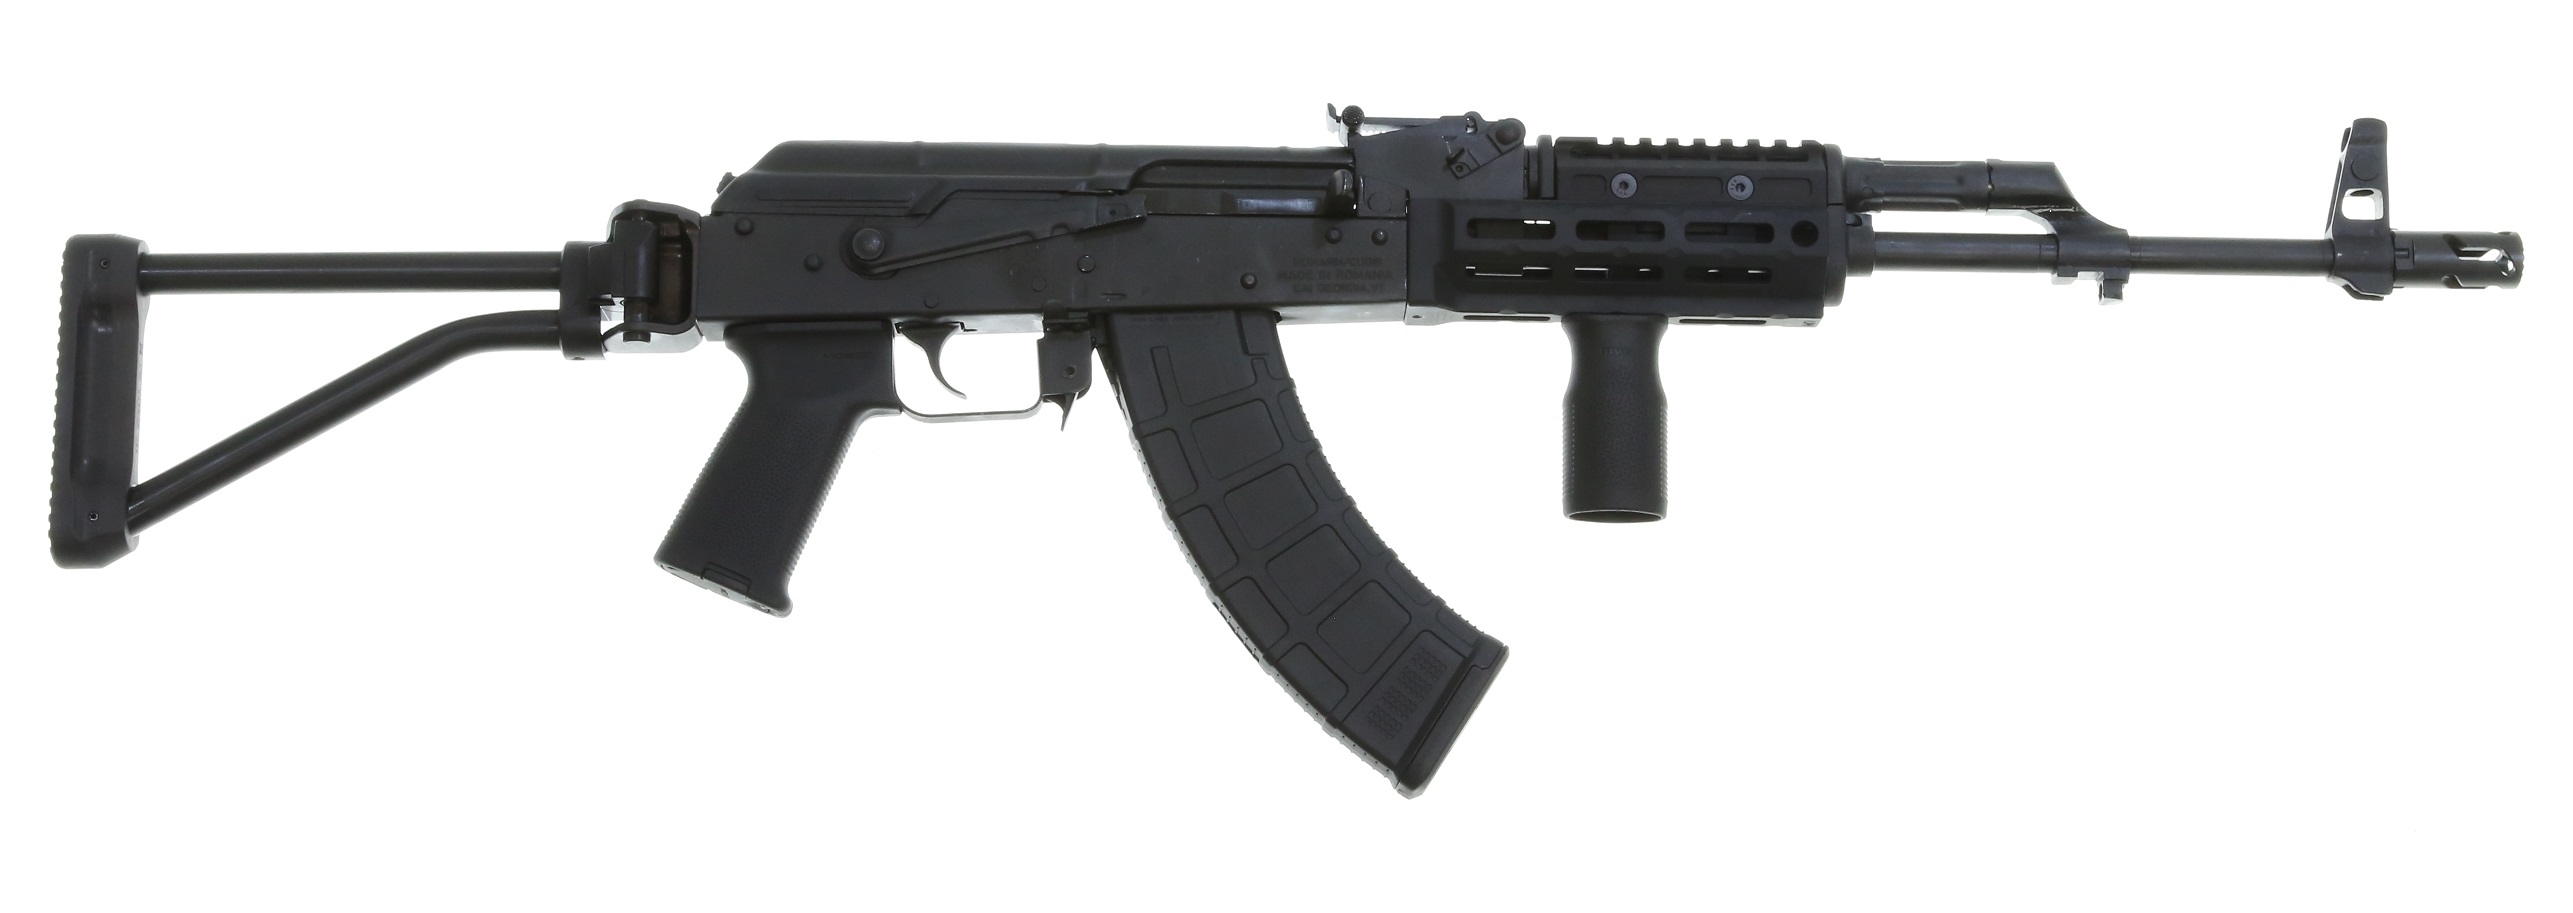 Century Arms Wasr 10 Ak 47 30rd With Tubular Folding Stock Midwest